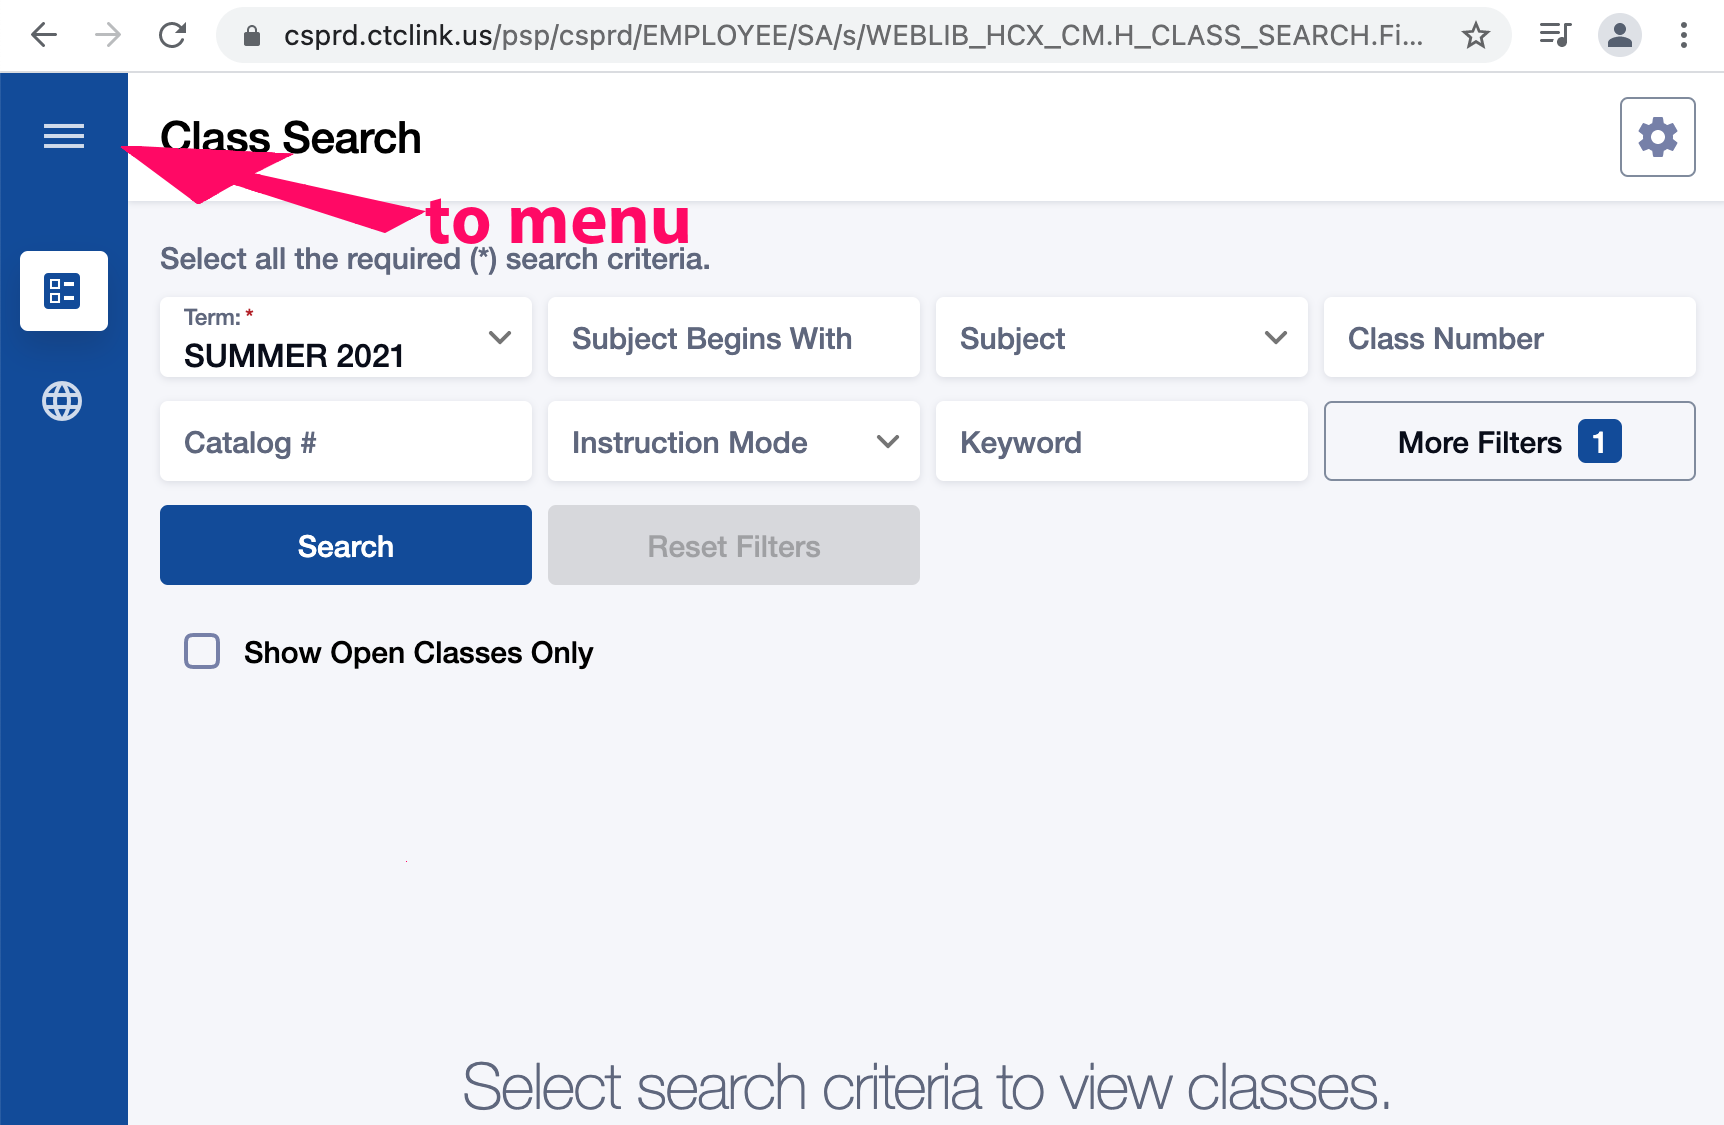 screen capture of search layout on desktop computer.